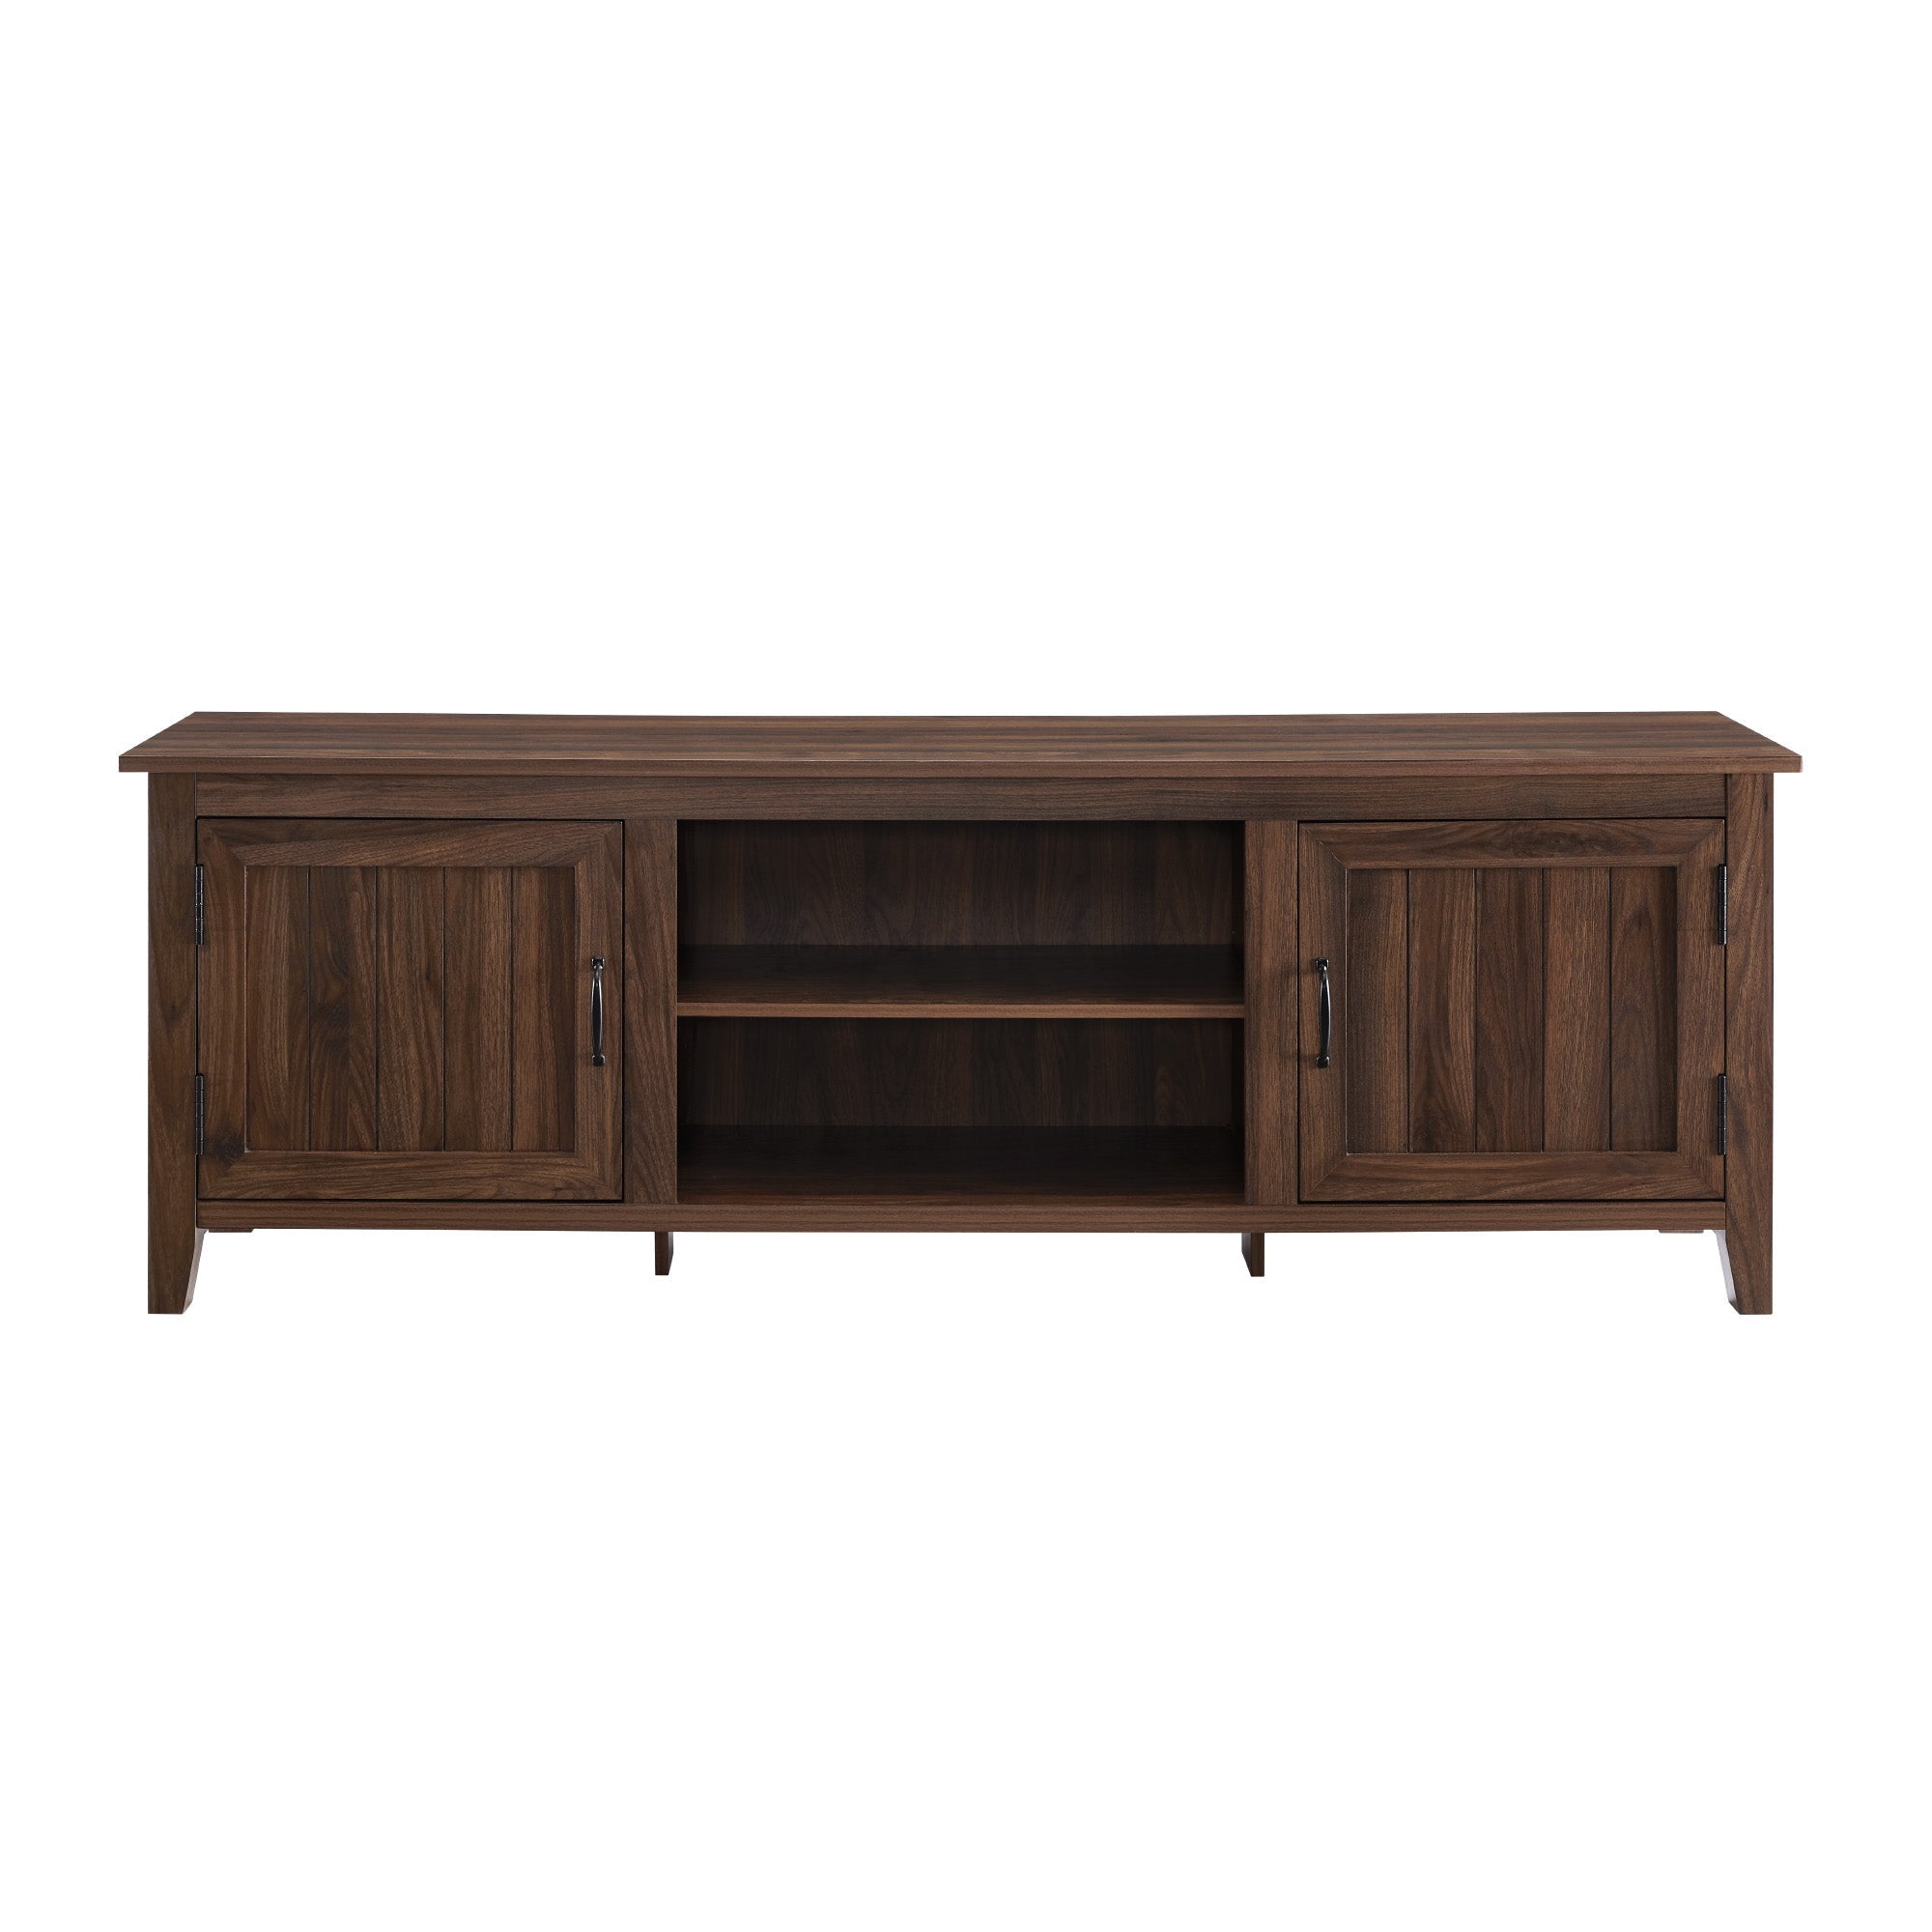 Dreamy 2-Door Grooved 70" TV Stand for 85" TVs - TV Stand